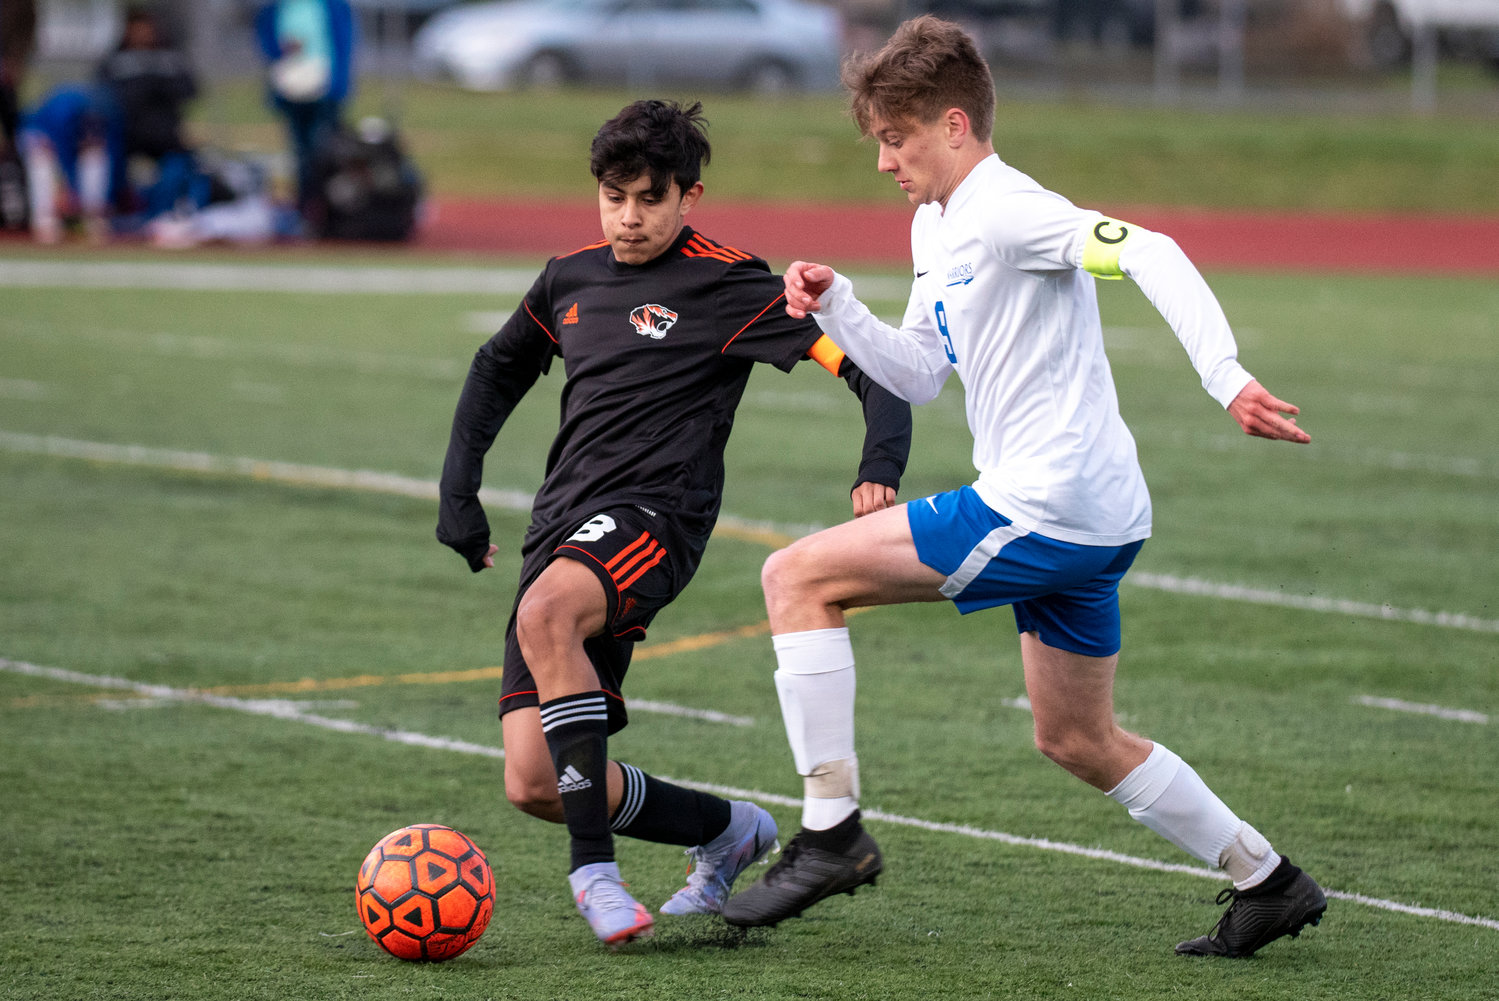 Centralia's Fernando Lopez (8) and Rochester's Levi Jennings (9) battle for possession during a league game in Centralia on Tuesday, April 12.